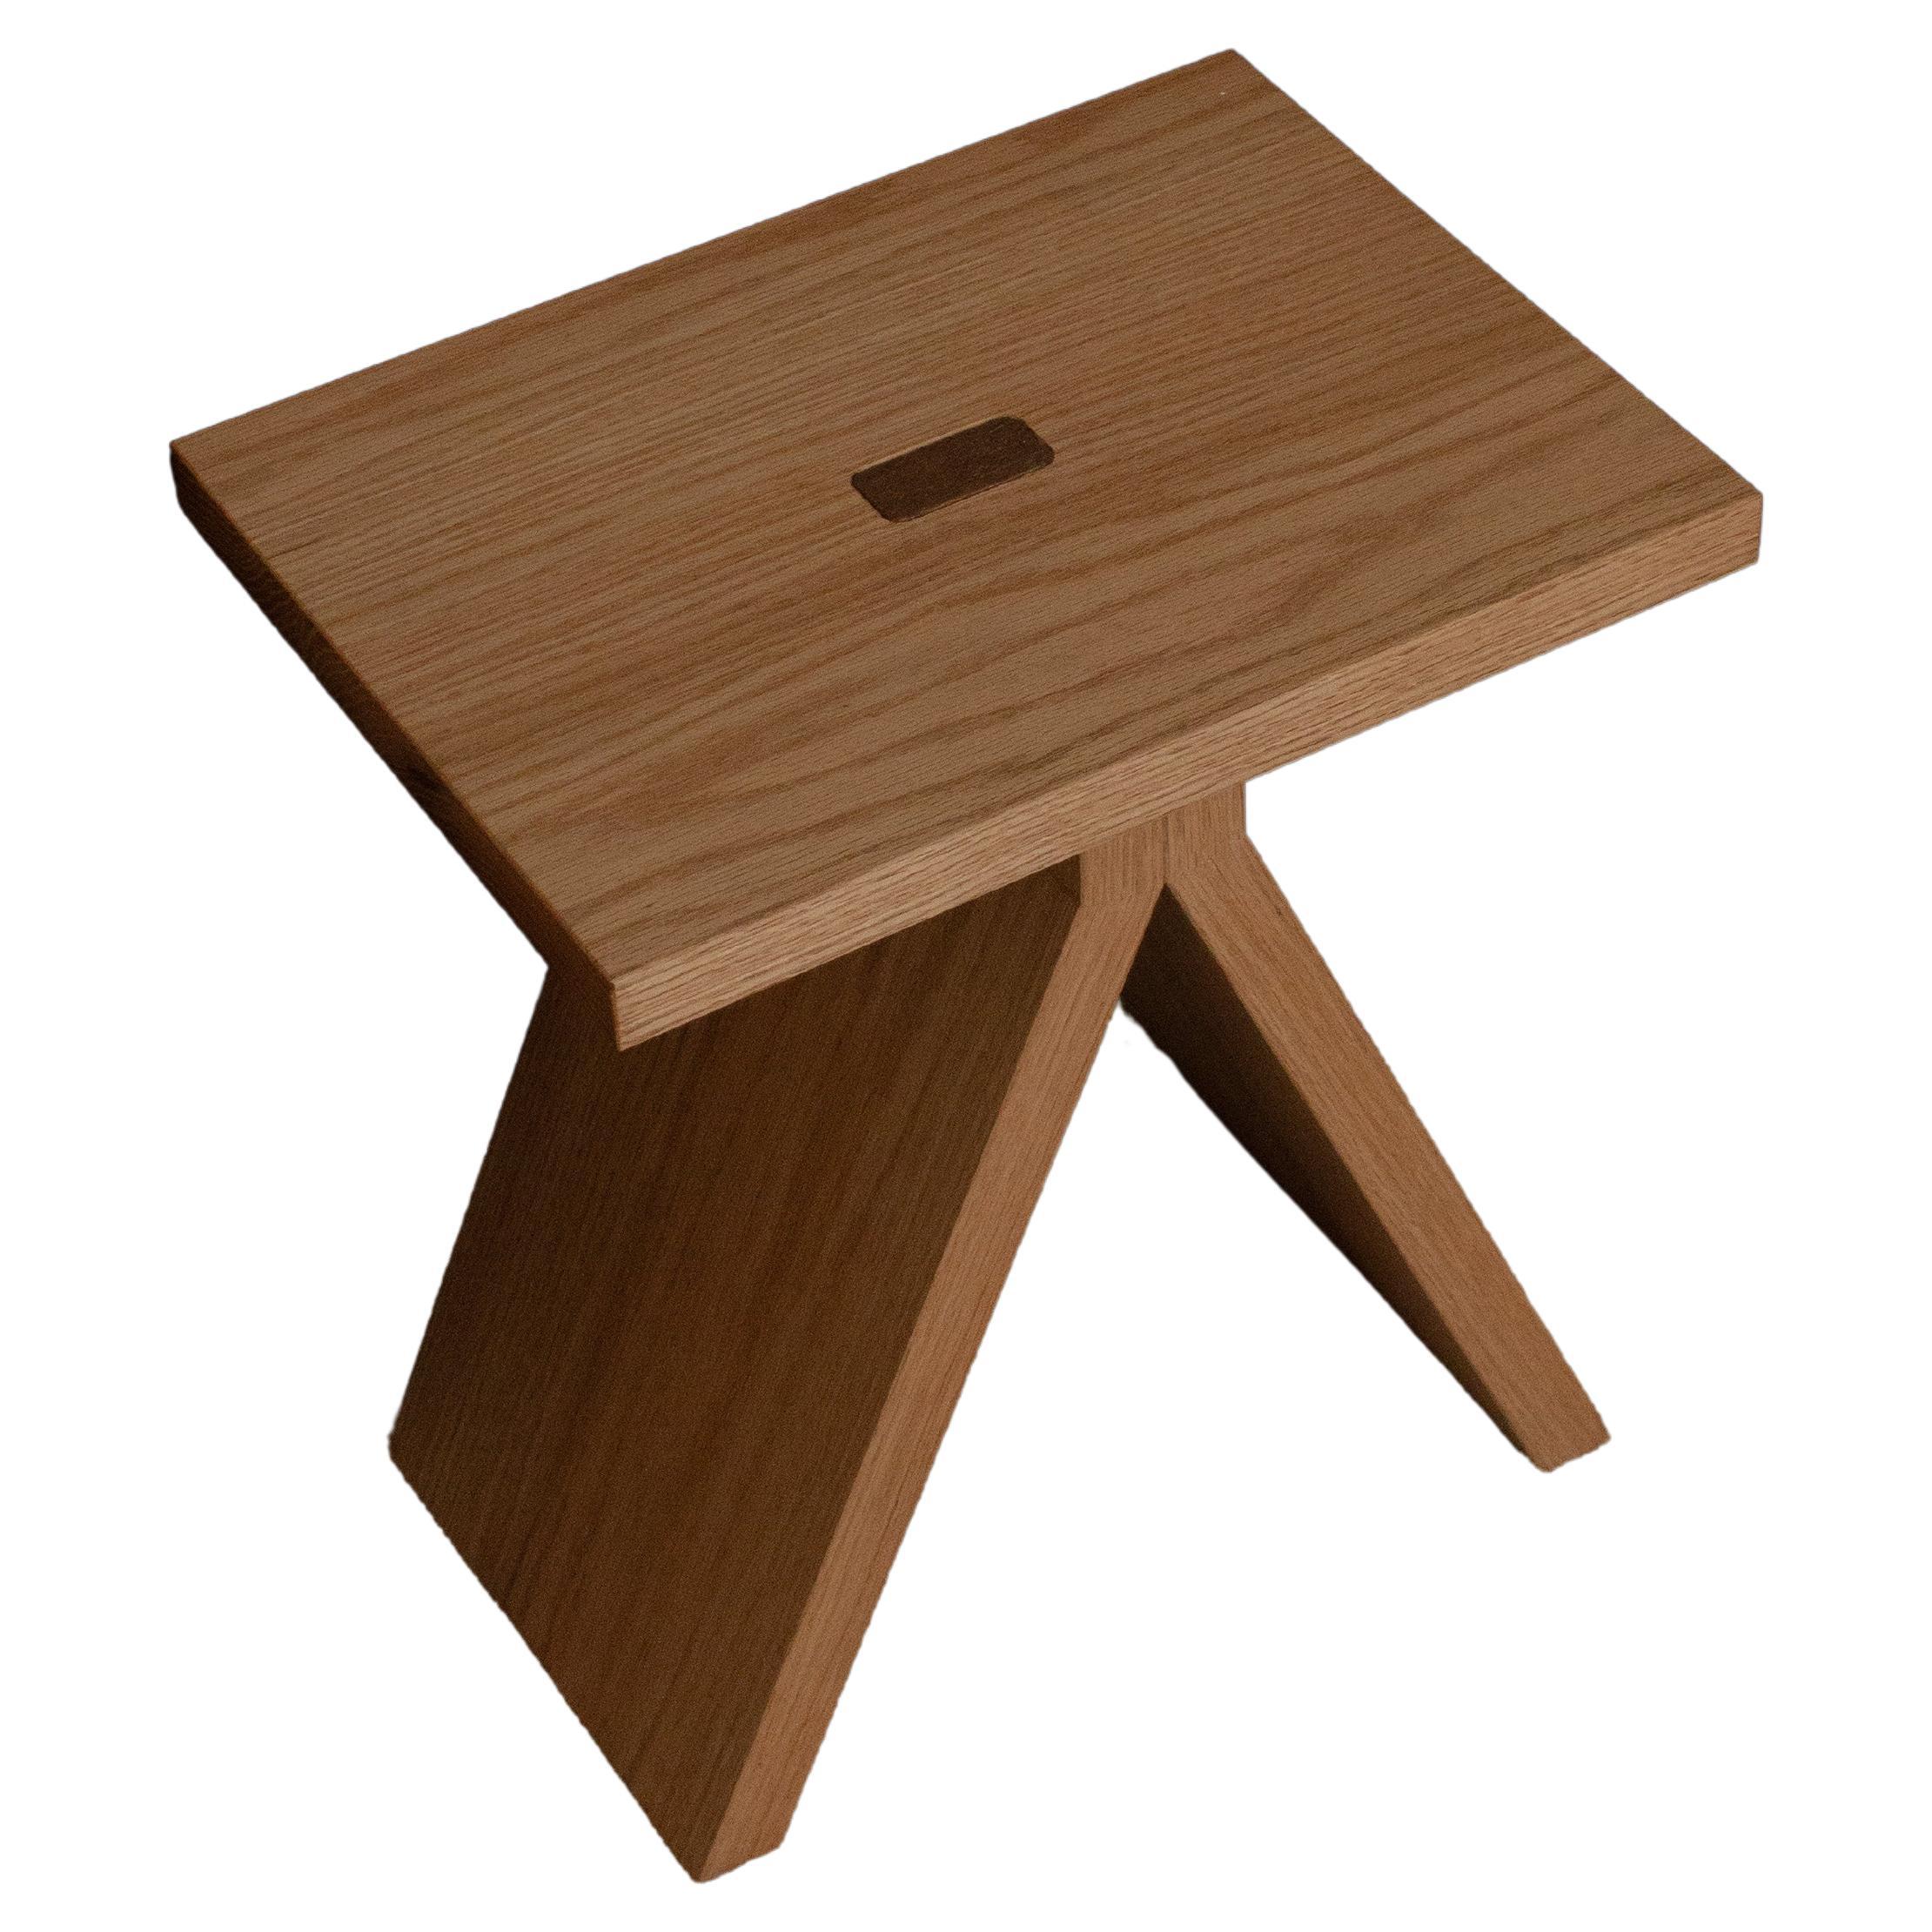 Minimal Wooden Stool "Boel" Made in Solid White Oak  For Sale